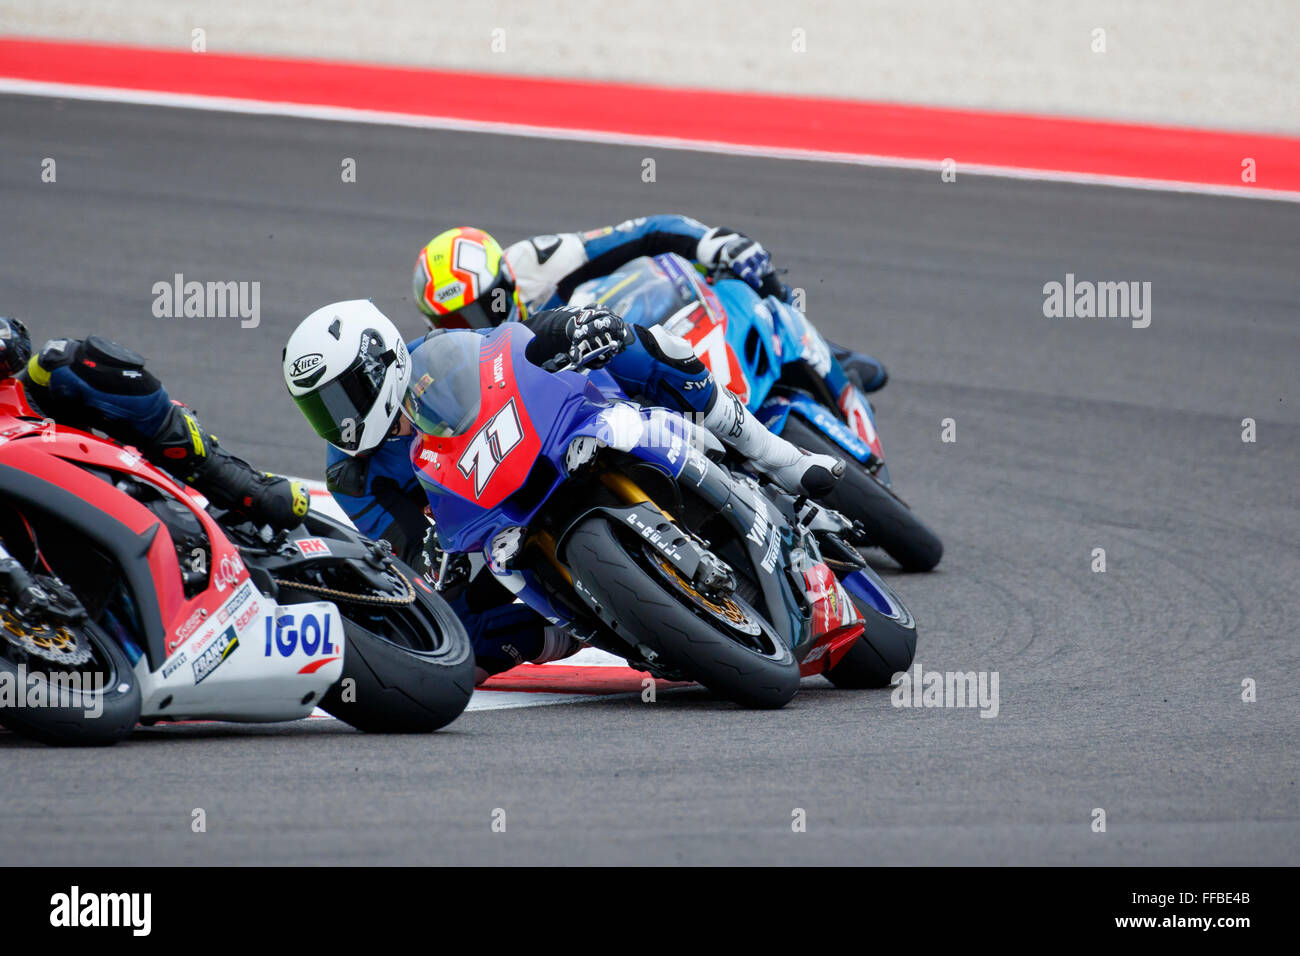 Misano Adriatico, Italy - June 20, 2015: Yamaha YZF R1 of MG Competition Team, driven by BERGMAN Christoffer Stock Photo